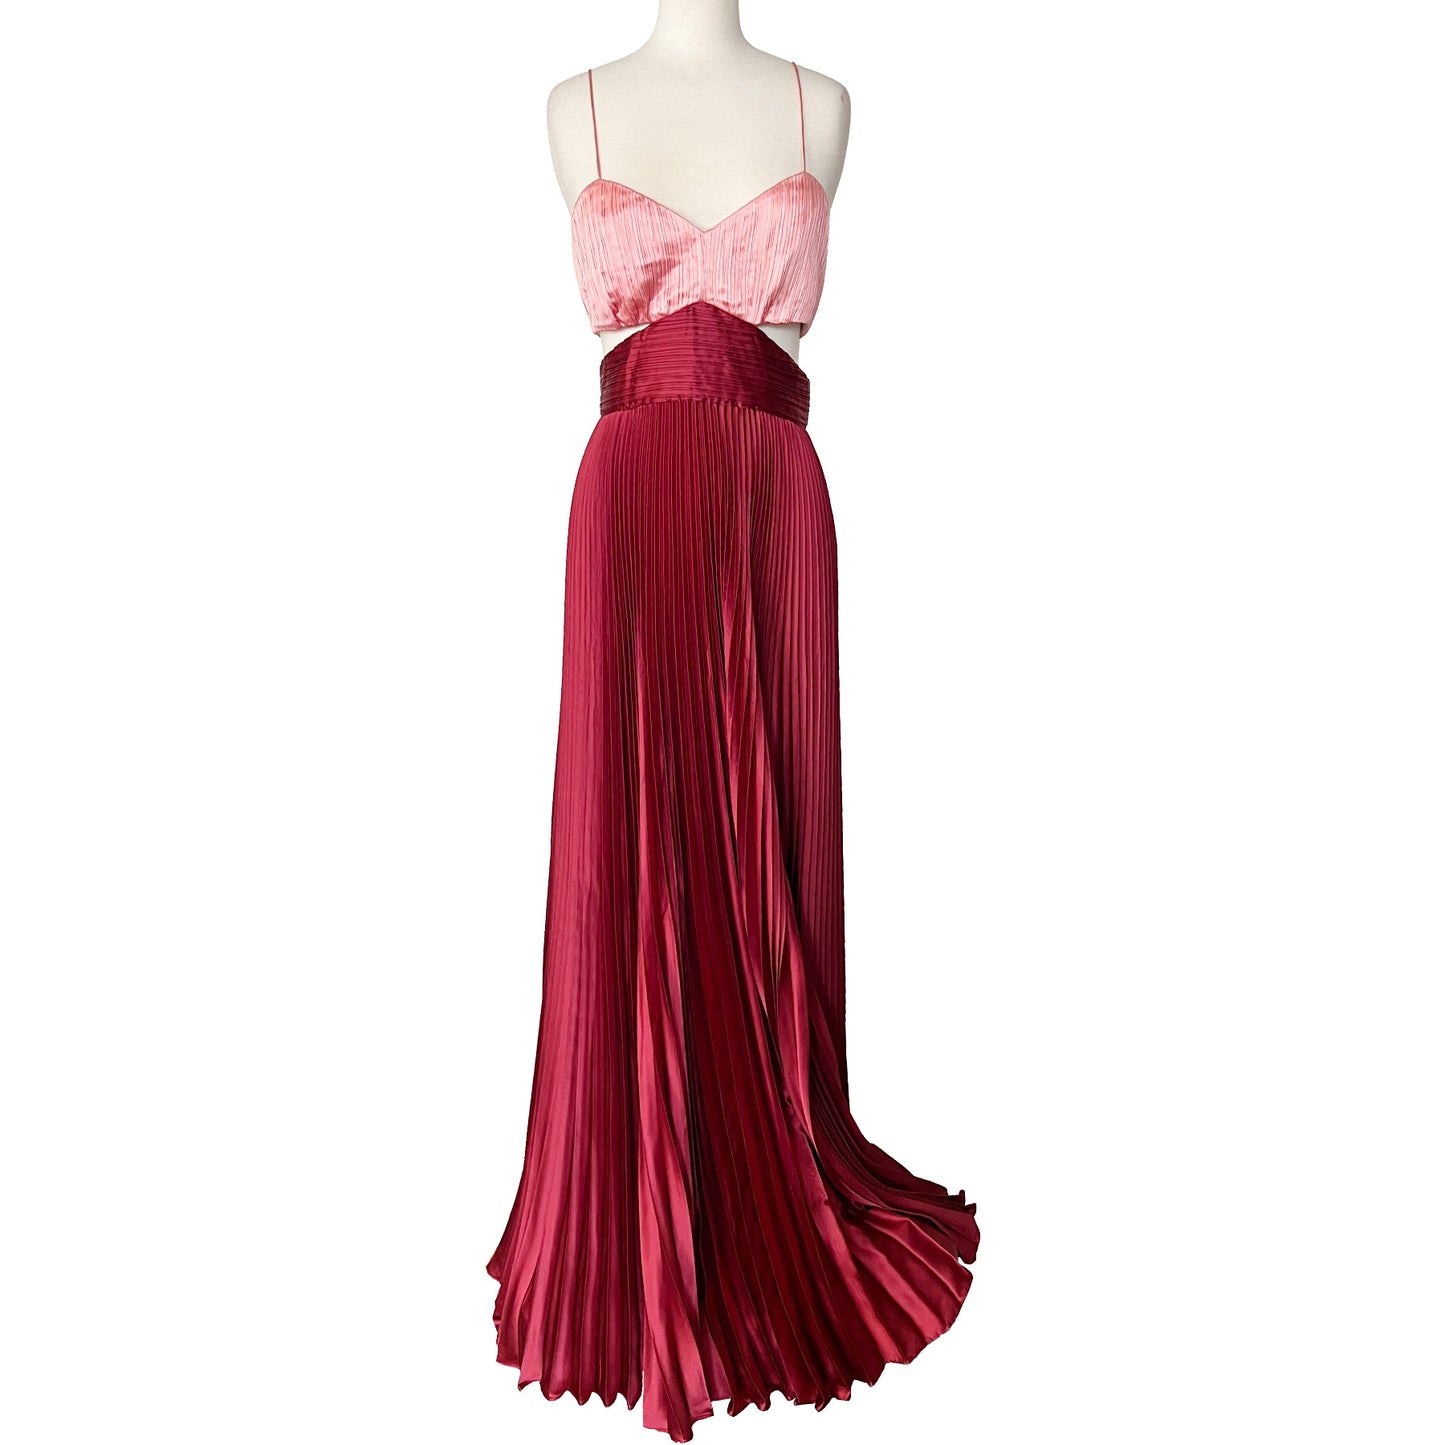 AMUR Elodie Two Toned Cut Out Pleated Satin Gown With Side Slit Long Gown Size US 10